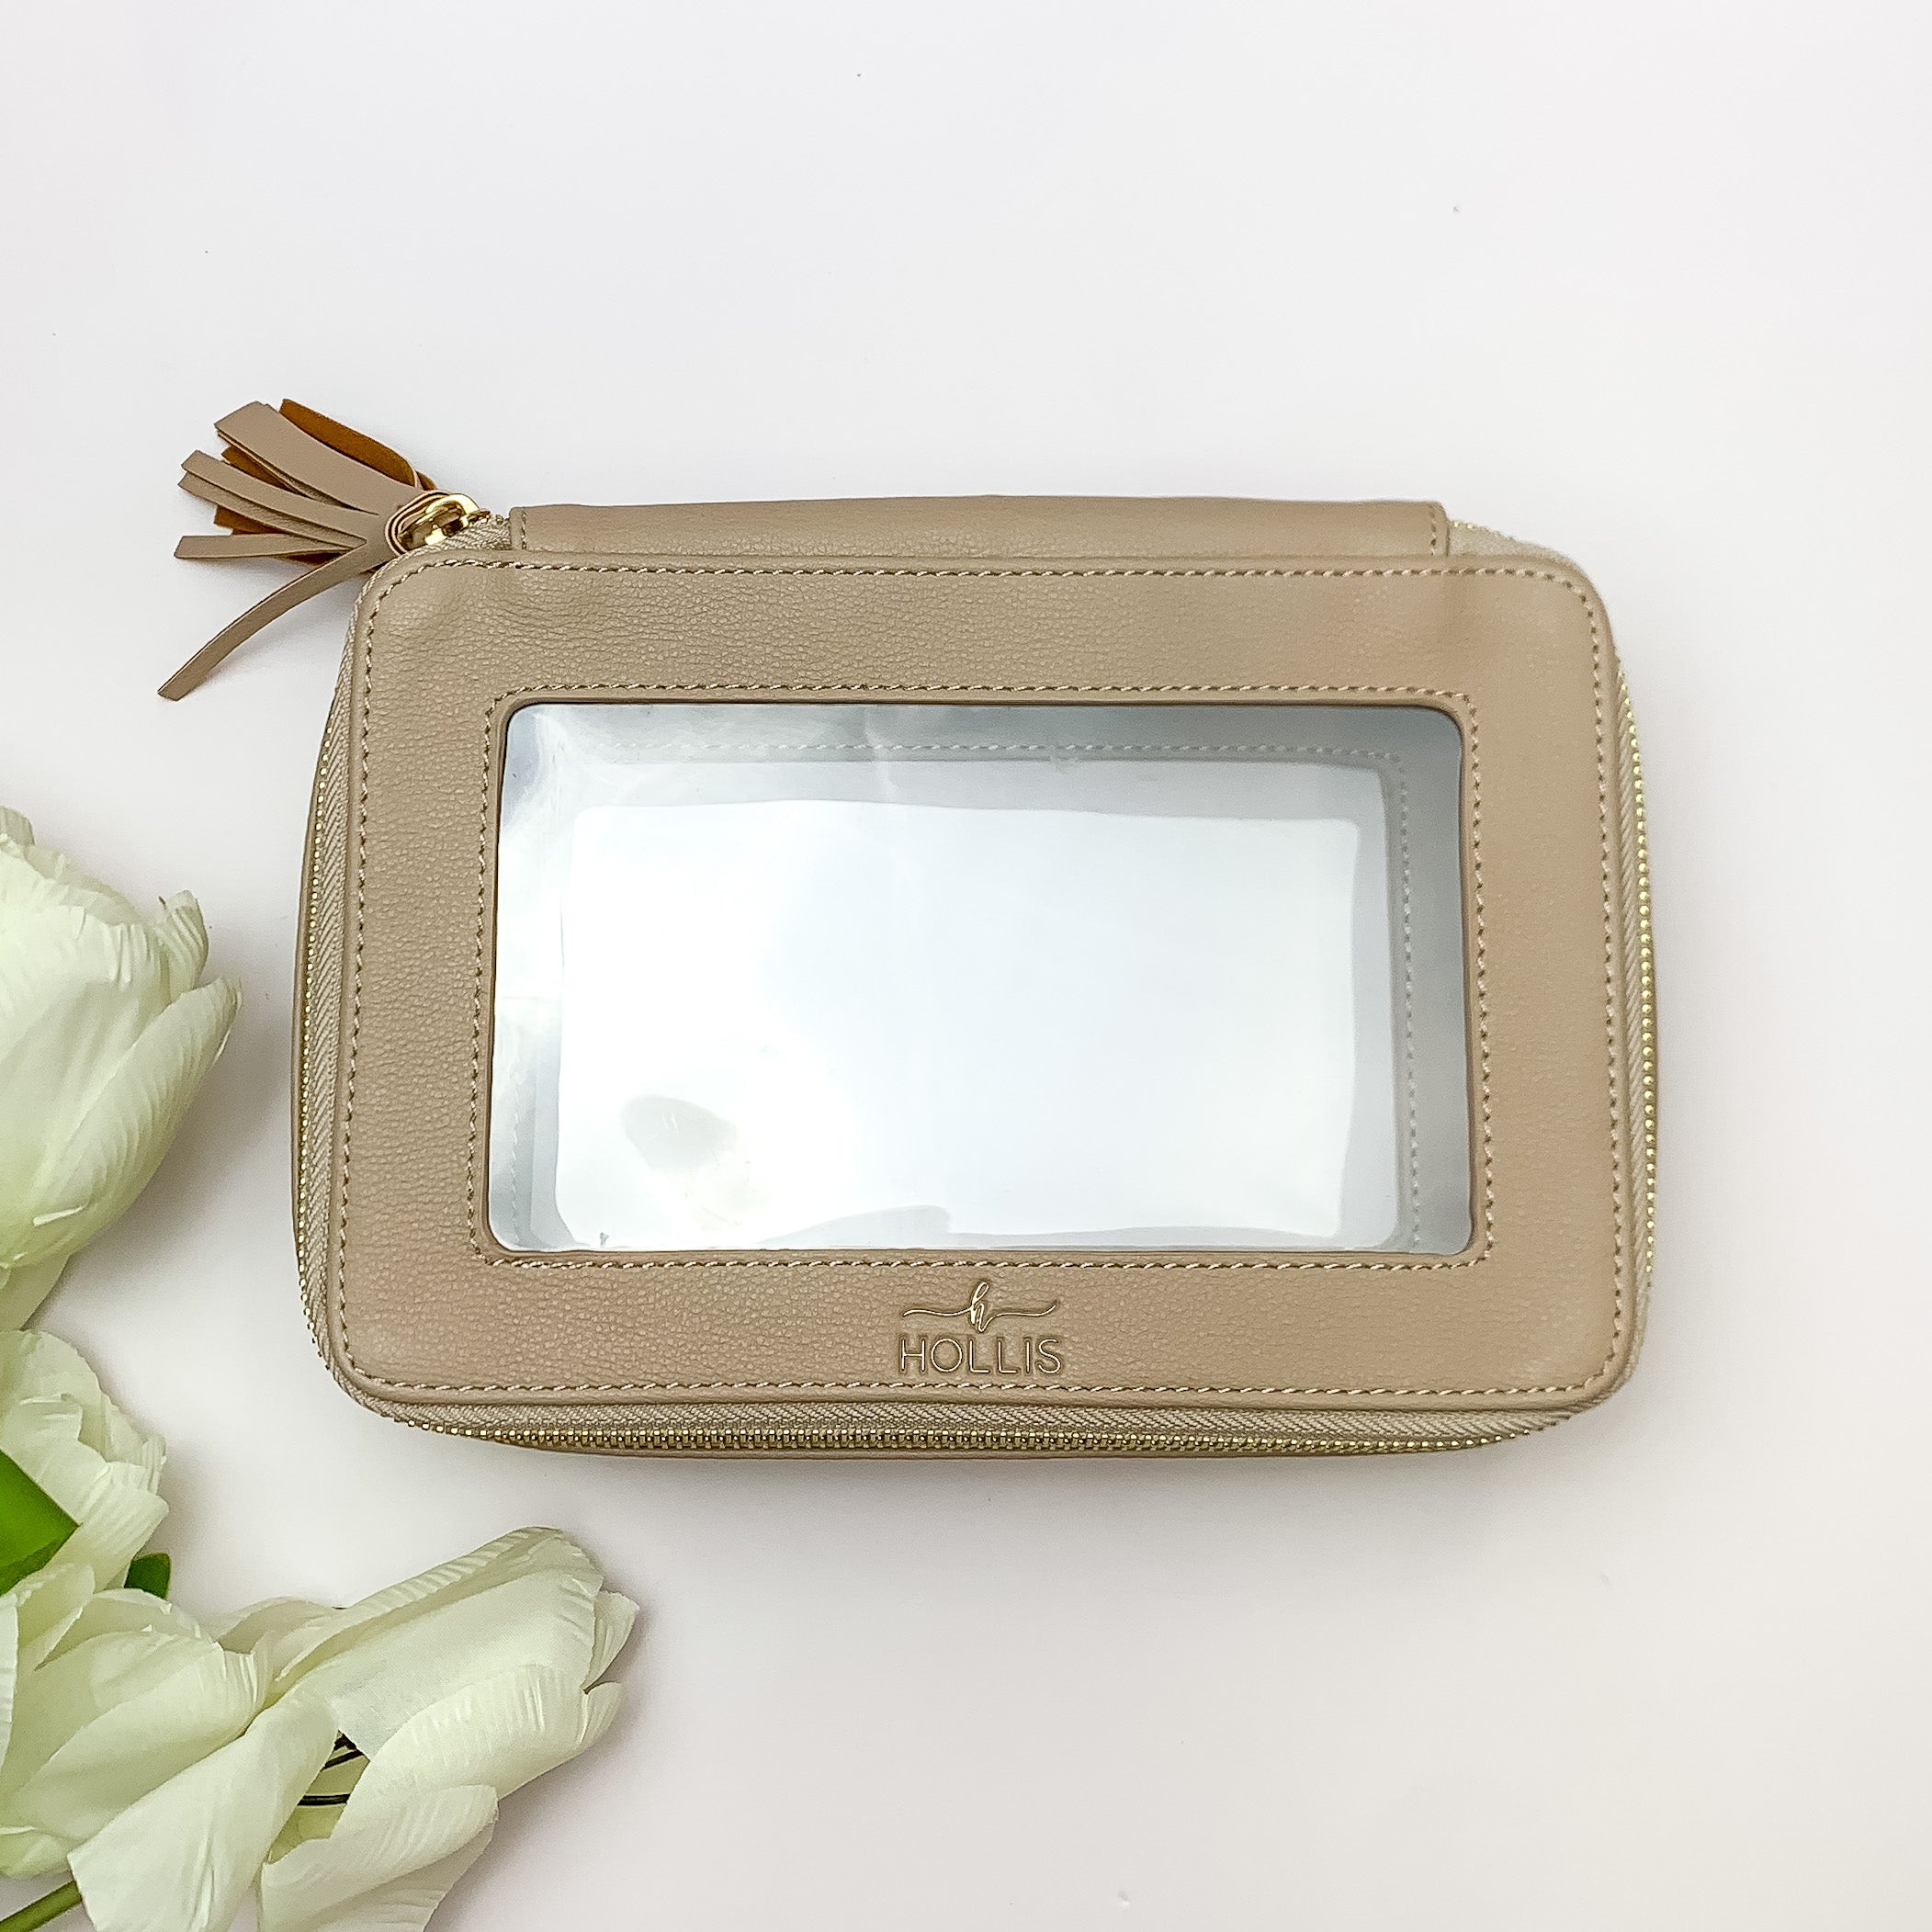 Nude and clear rectangle toiletry bag pictured on a white background with white flowers on the bottom left corner. 